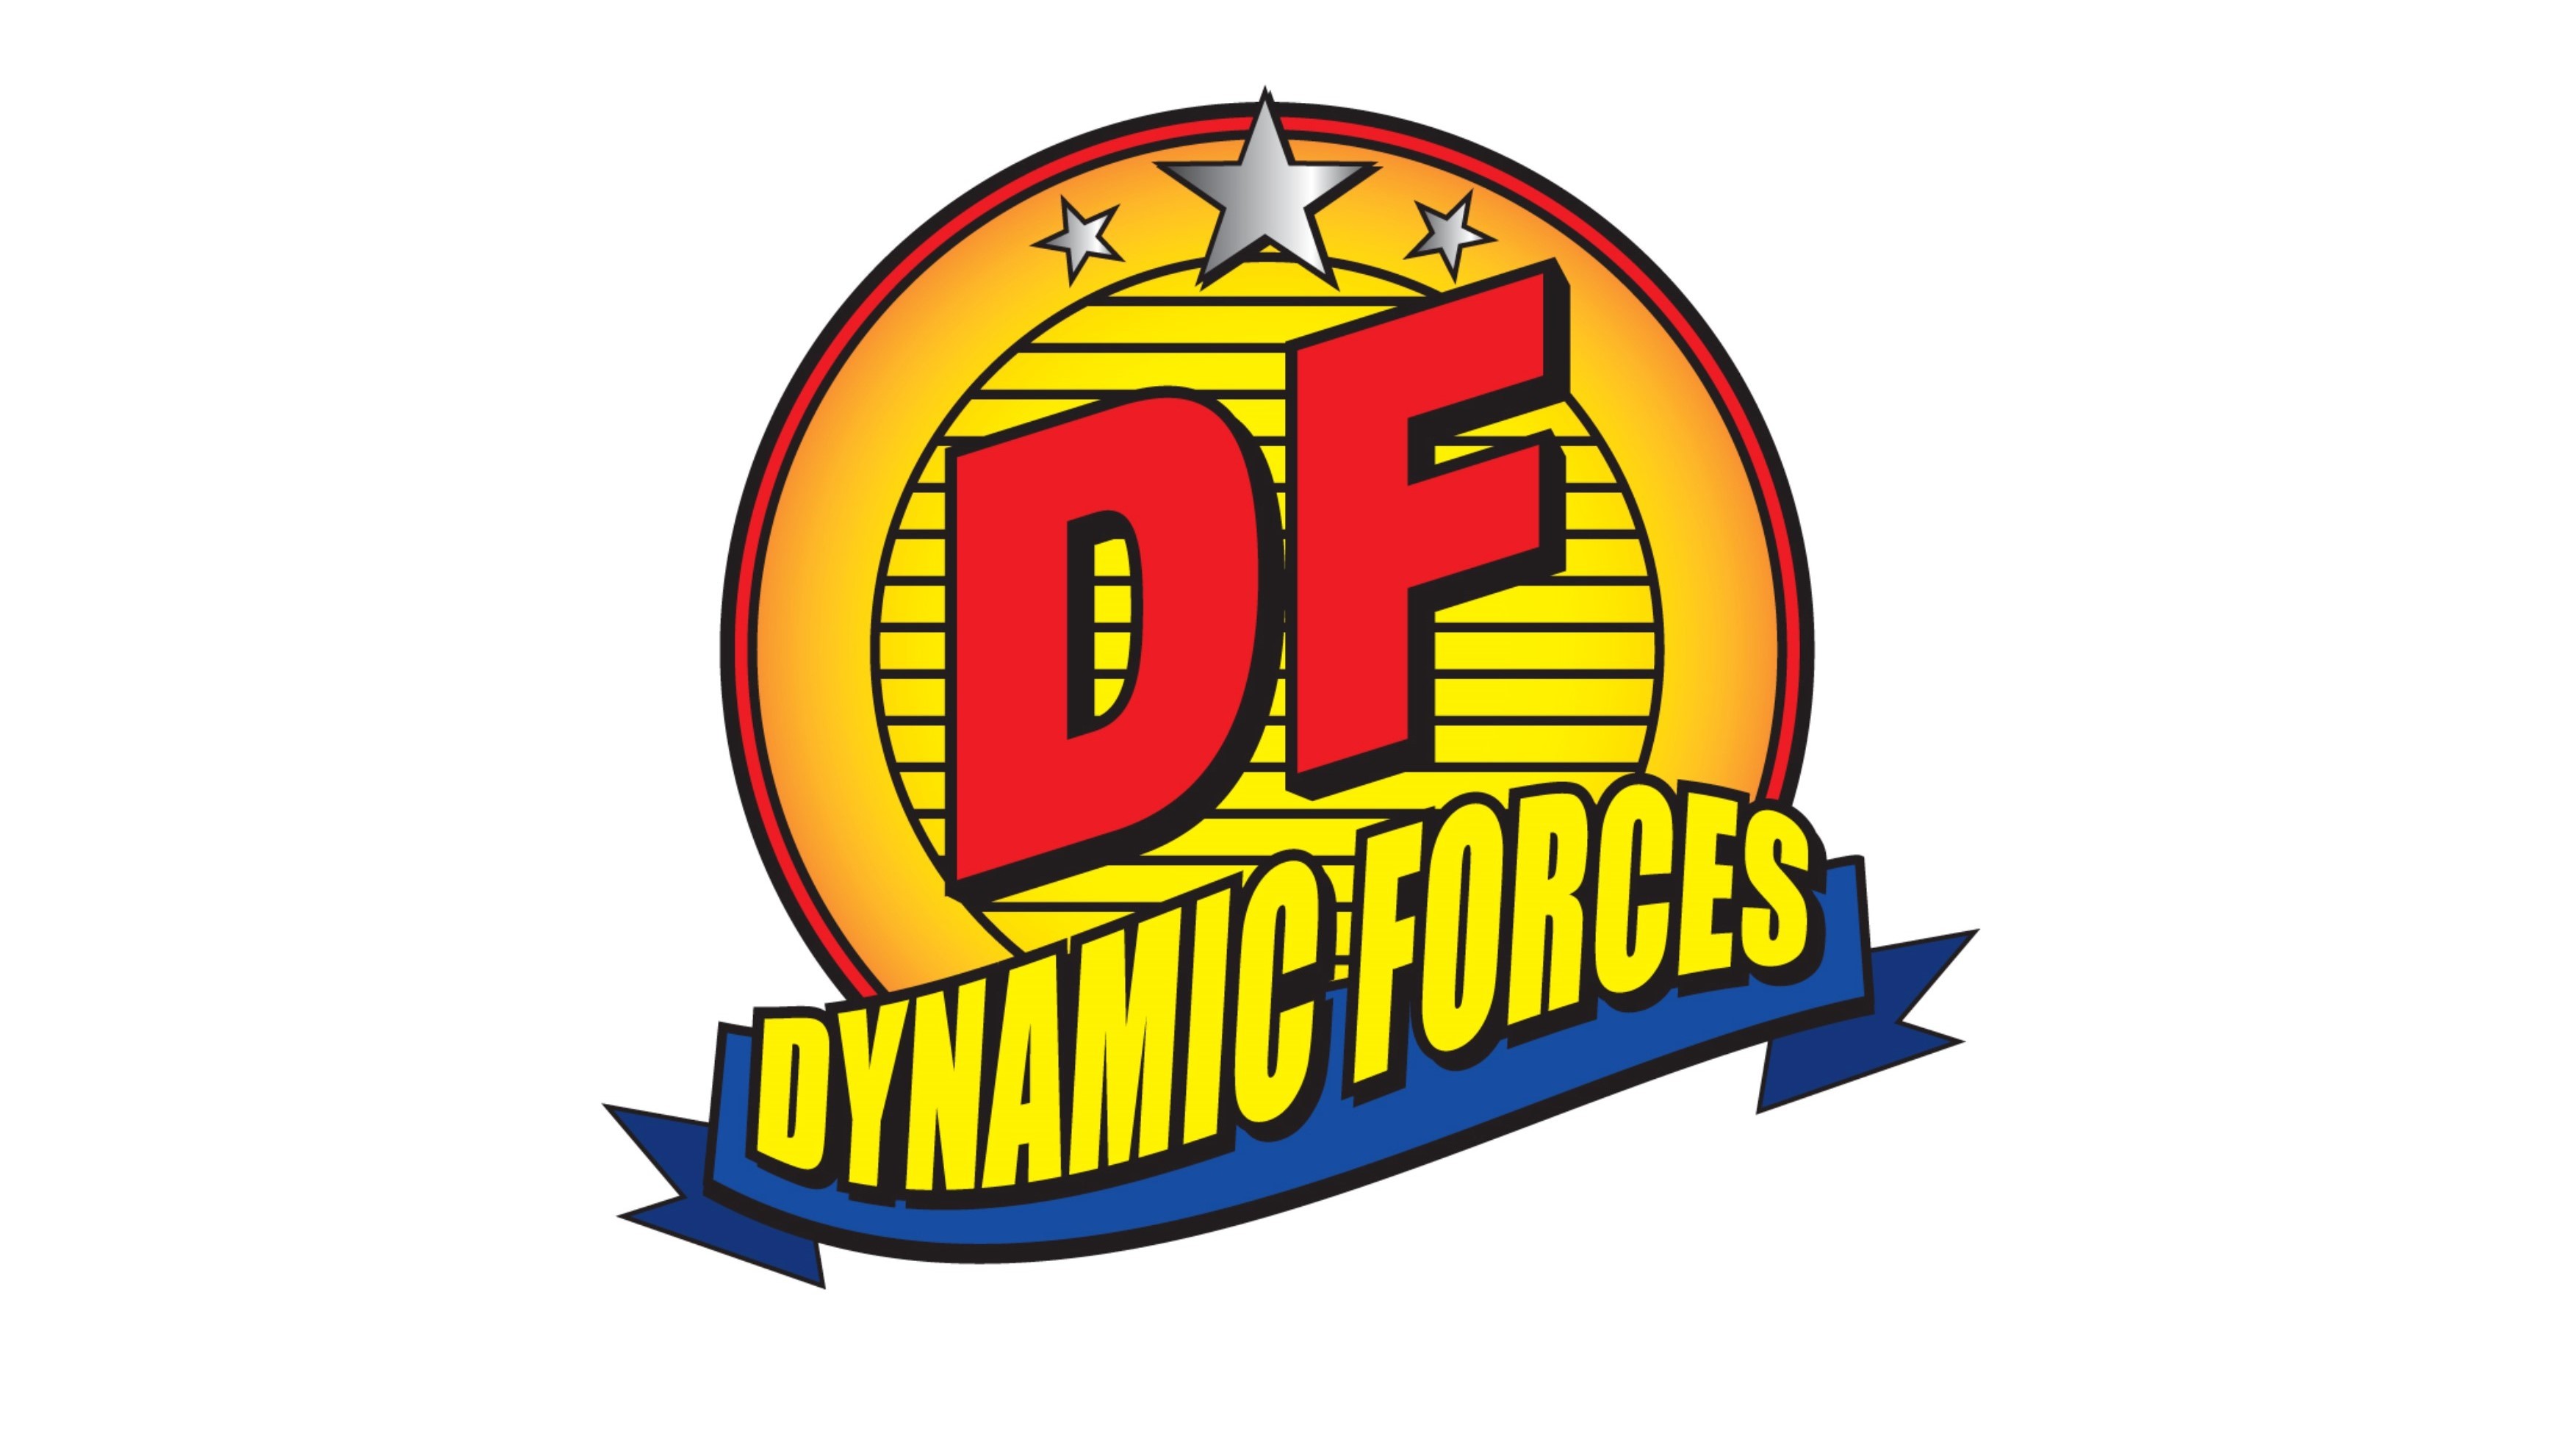 DYNAMIC FORCES